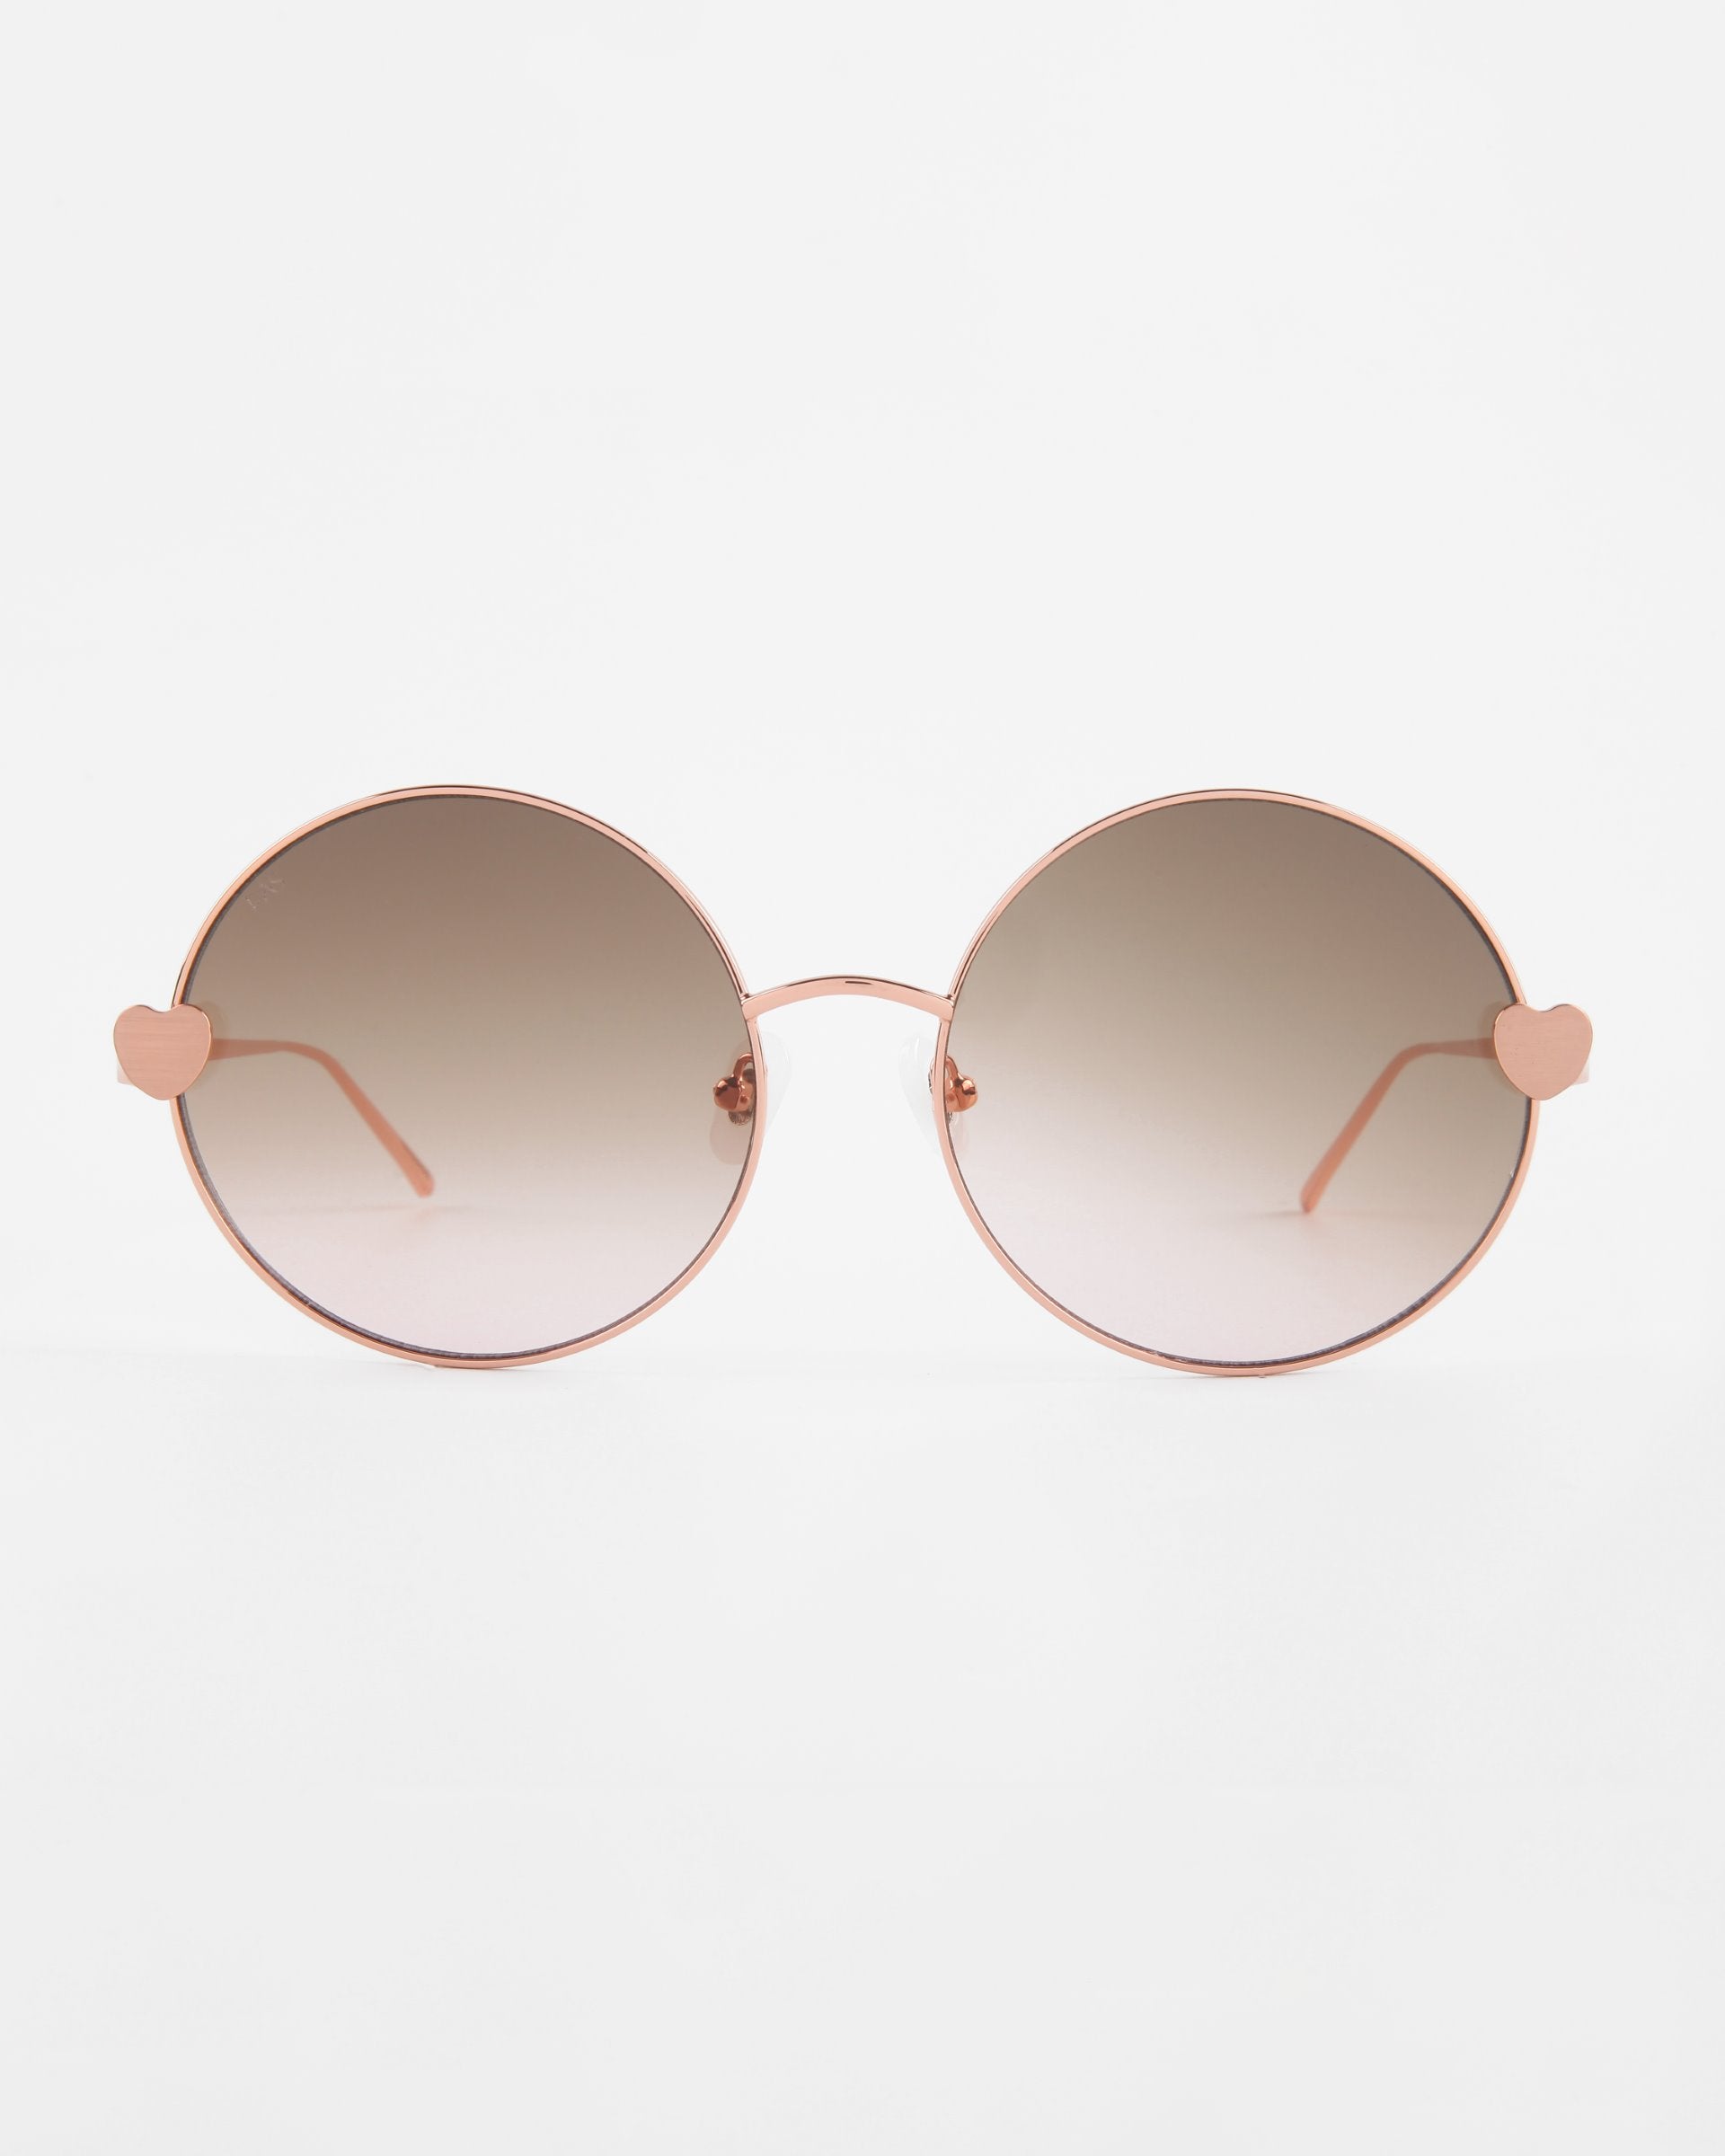 A pair of round, gradient-tinted **Love Story** shades from **For Art's Sake®** with thin, rose-gold frames. The temples feature small, heart-shaped decorations near the lenses and jadestone nose pads. The background is plain white, ensuring they stand out while offering 100% UV protection.